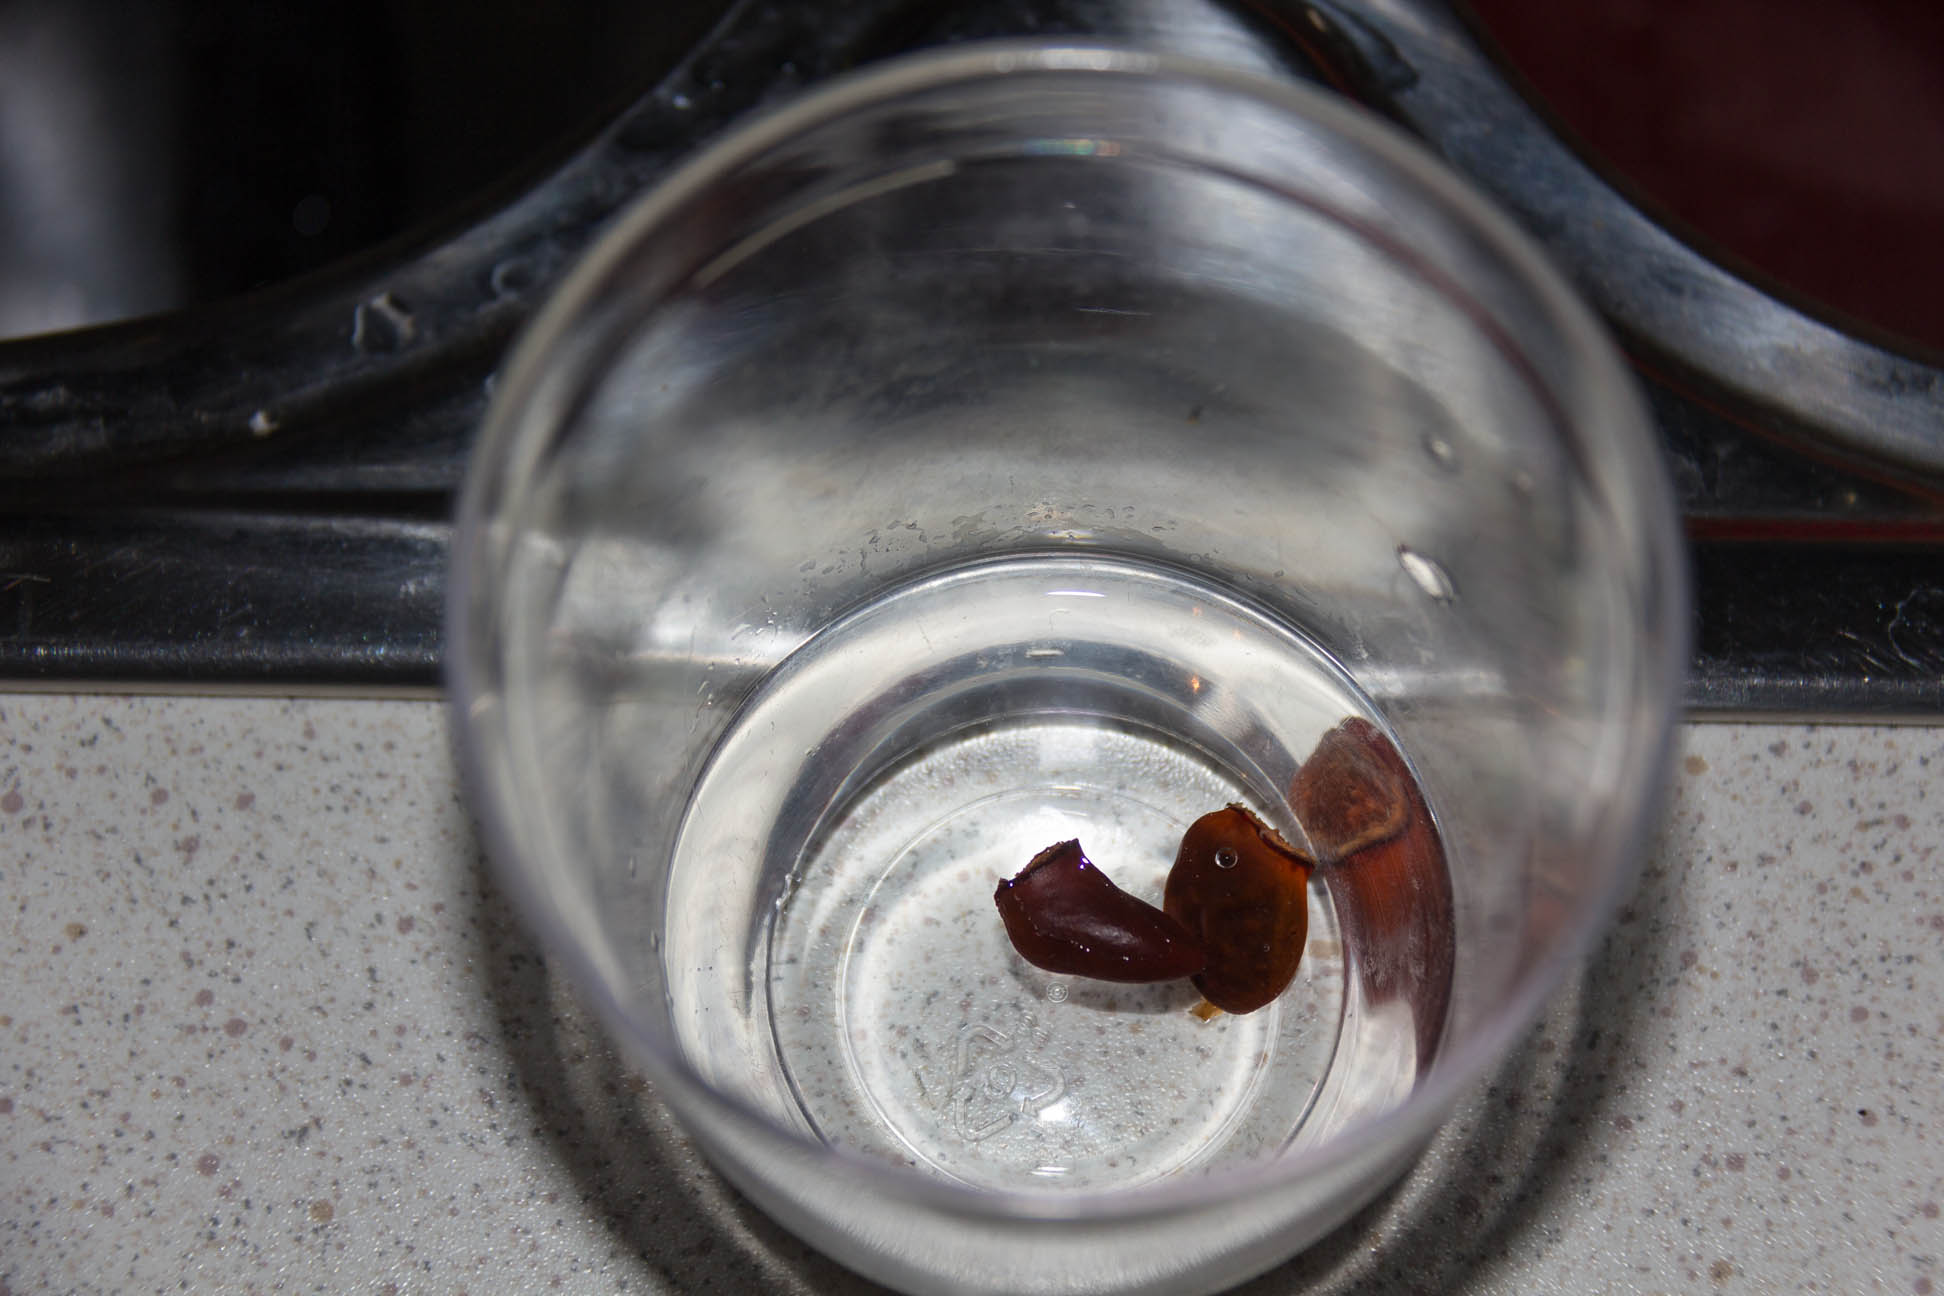 01/01/15 Day 1: Lychee seed germination experimentation Put an old seed into a cup of water